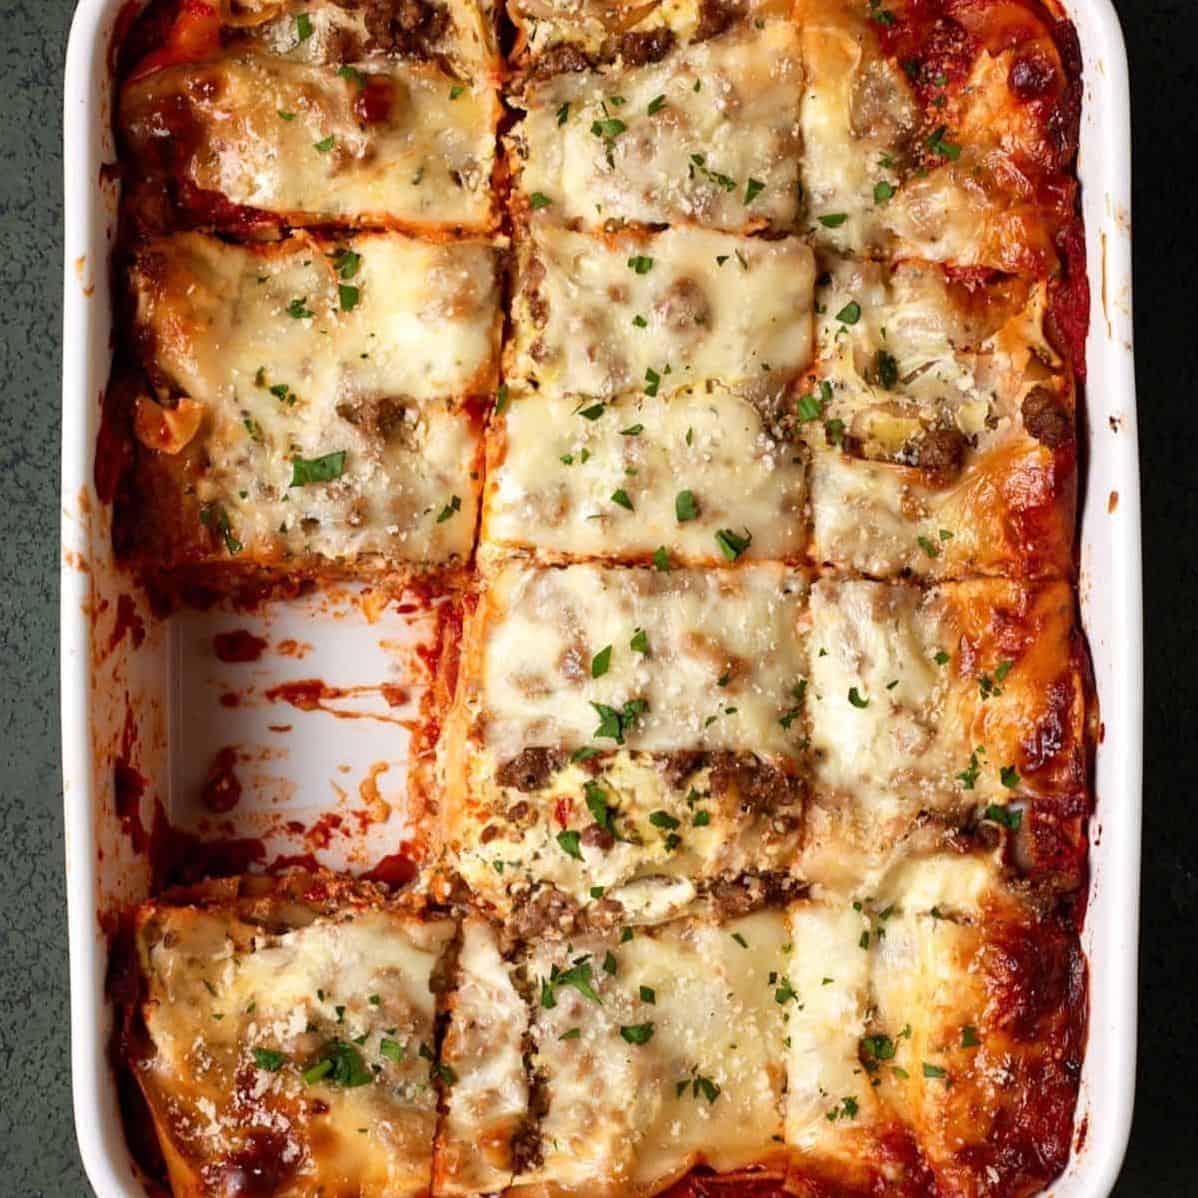  Each bite of this no-boil lasagna is packed with rich, savory flavor that will